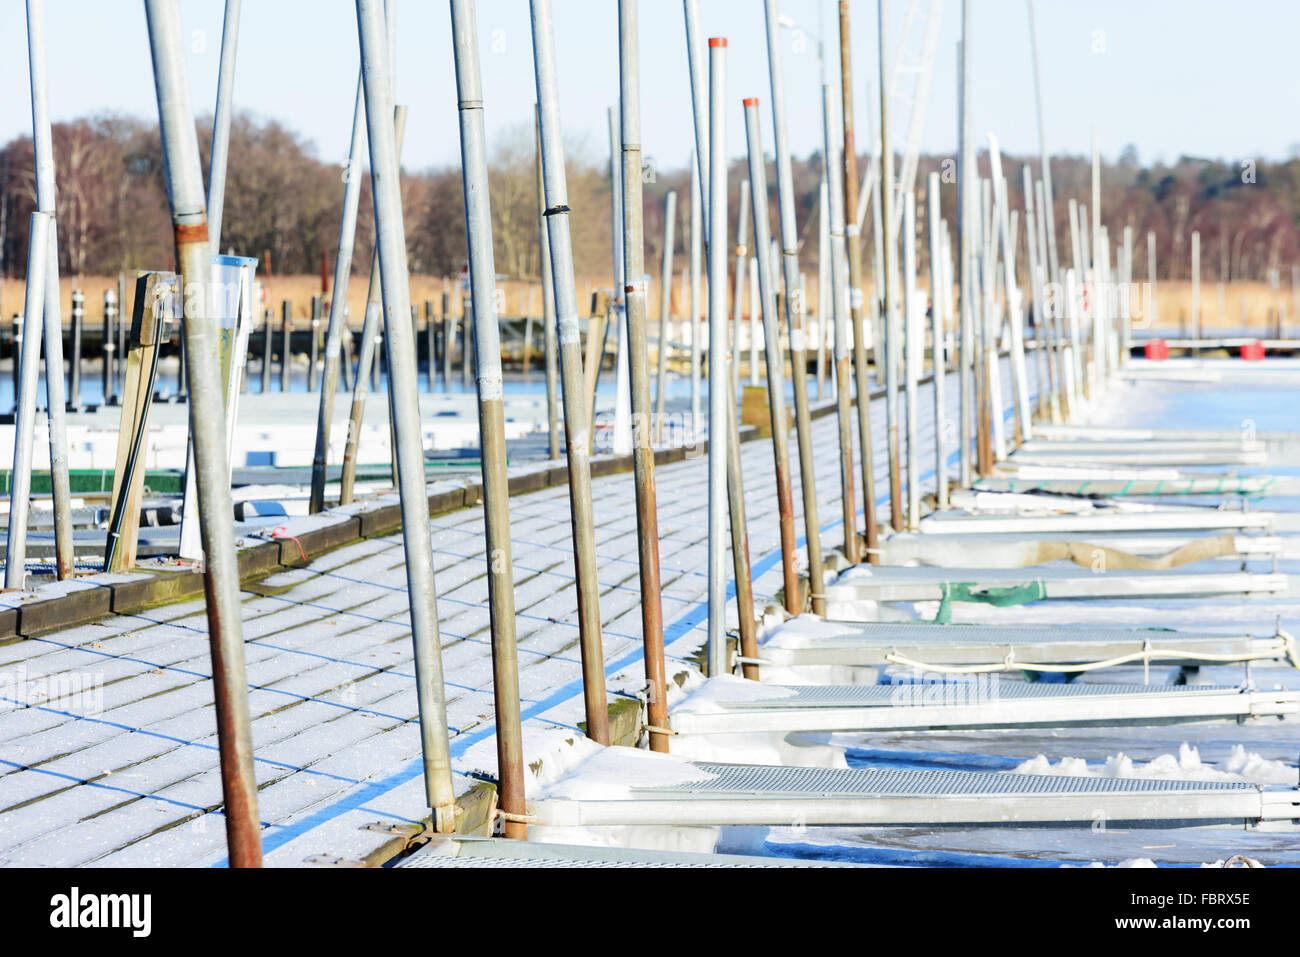 A pier at a marina in winter. The wooden floor is frosty and there are no boats in the marina. Lots of metal poles stand erected Stock Photo